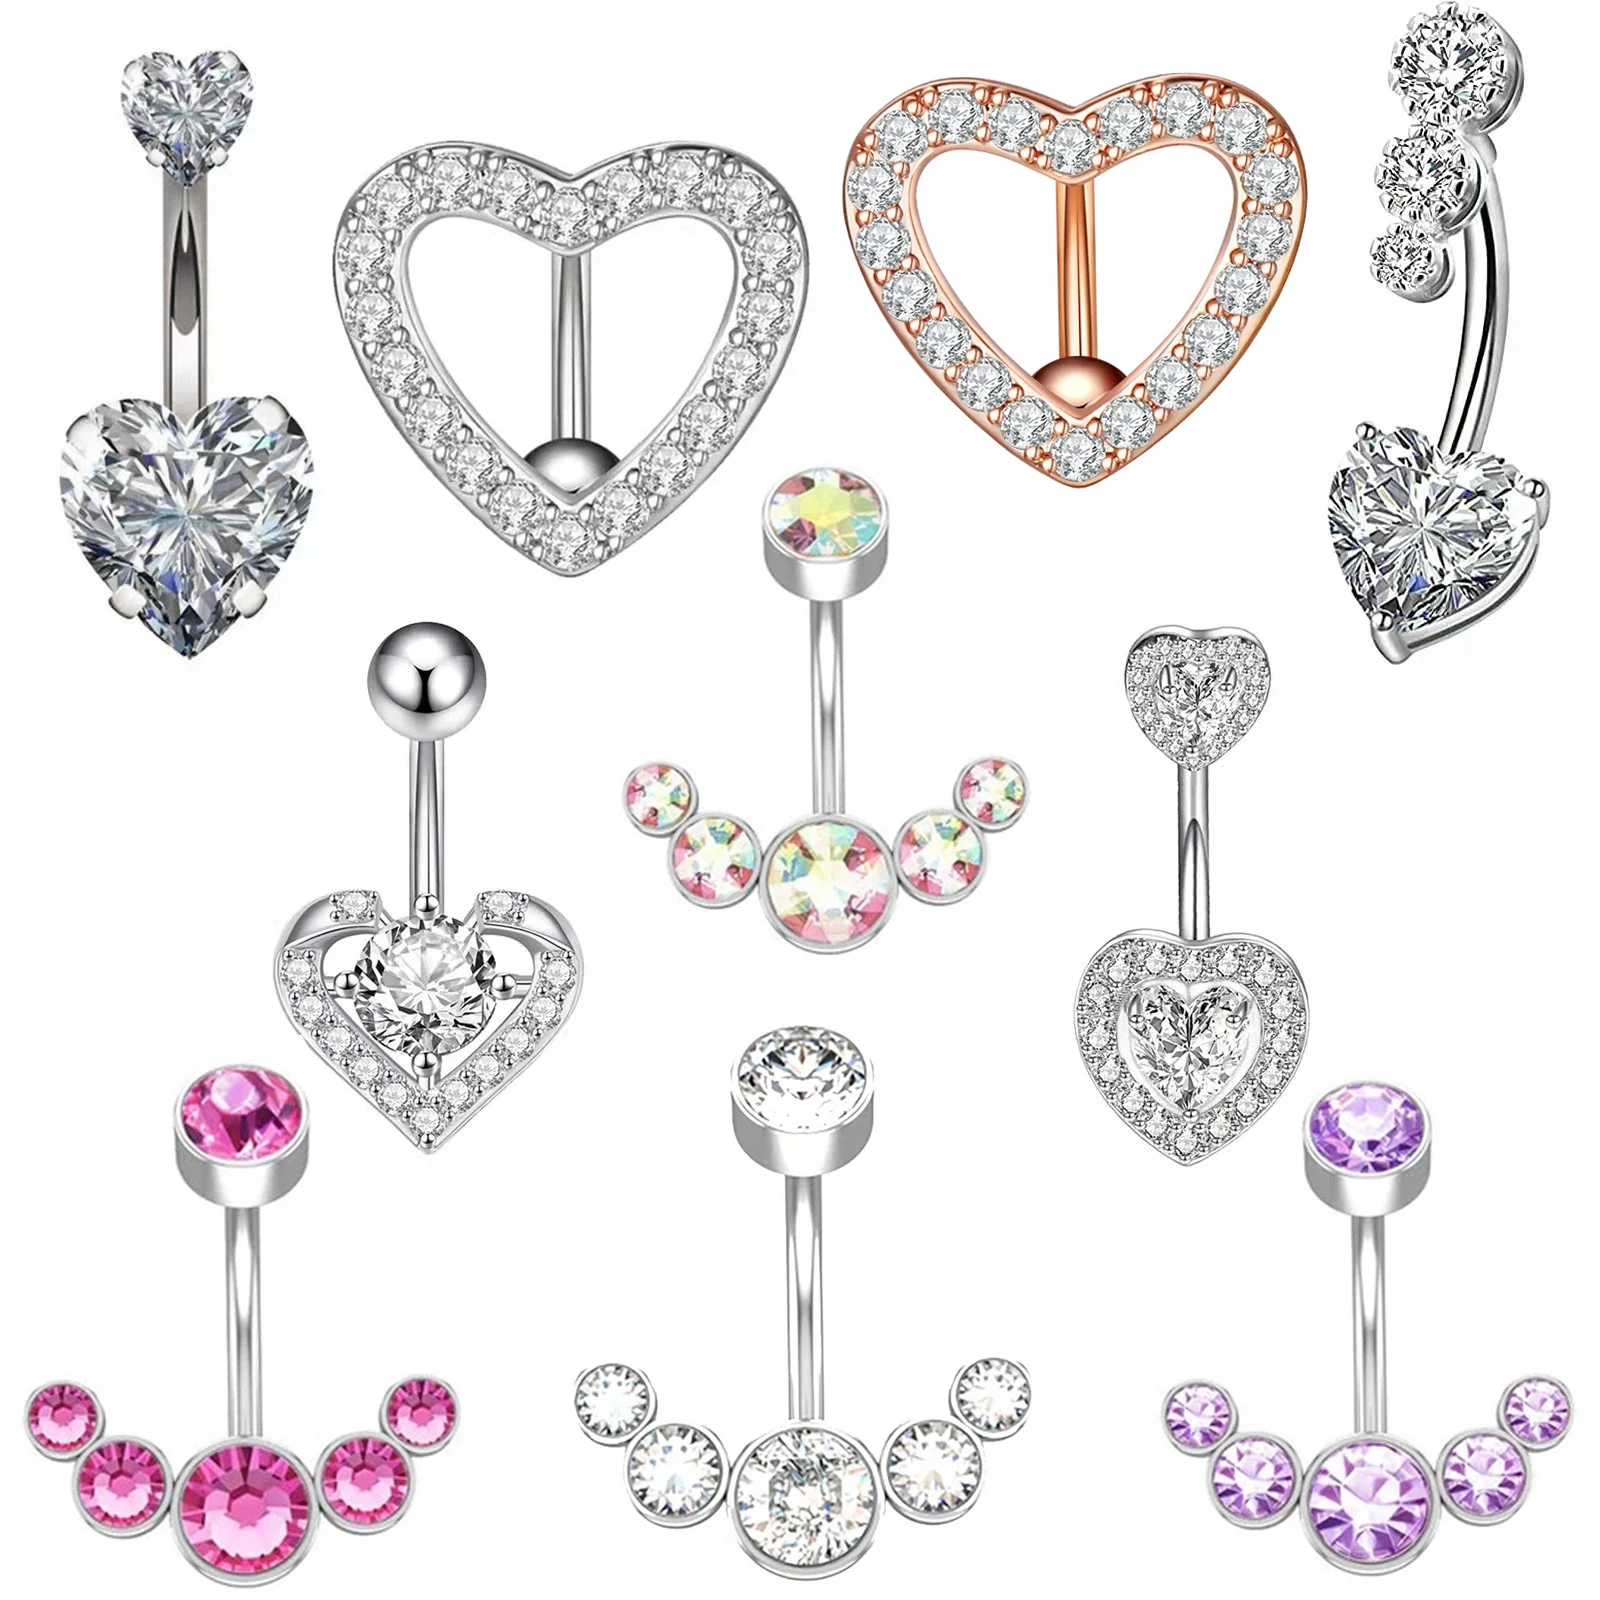 Crystal Double Heart Belly Button Ring Navel Piercing CZ Belly Piercing Rings Jewelry Umbilical Pircing Women Body Jewelery